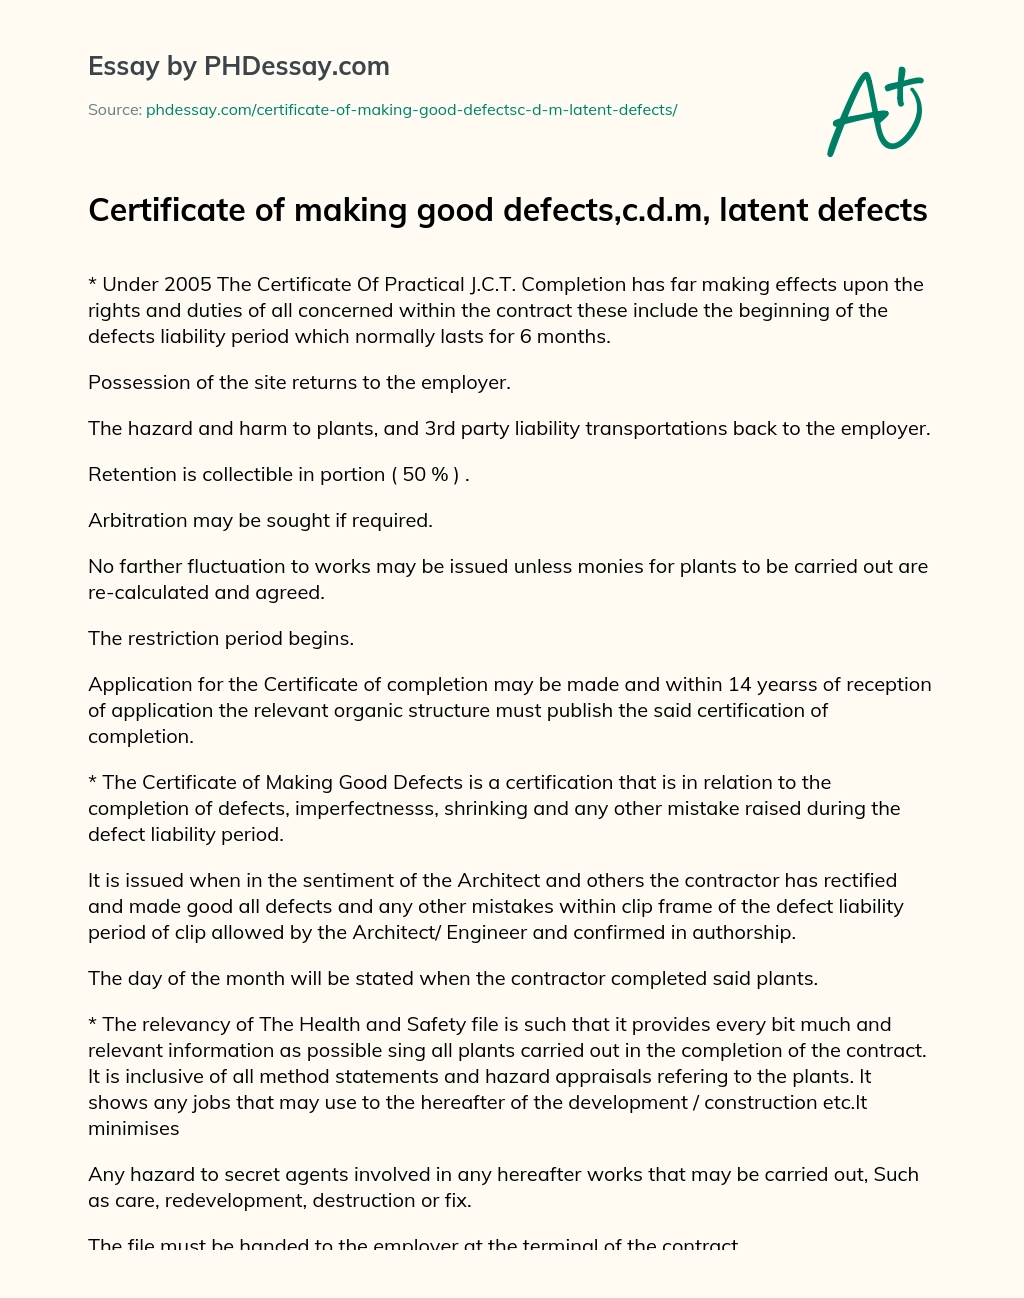 Certificate of making good defects,c.d.m, latent defects essay